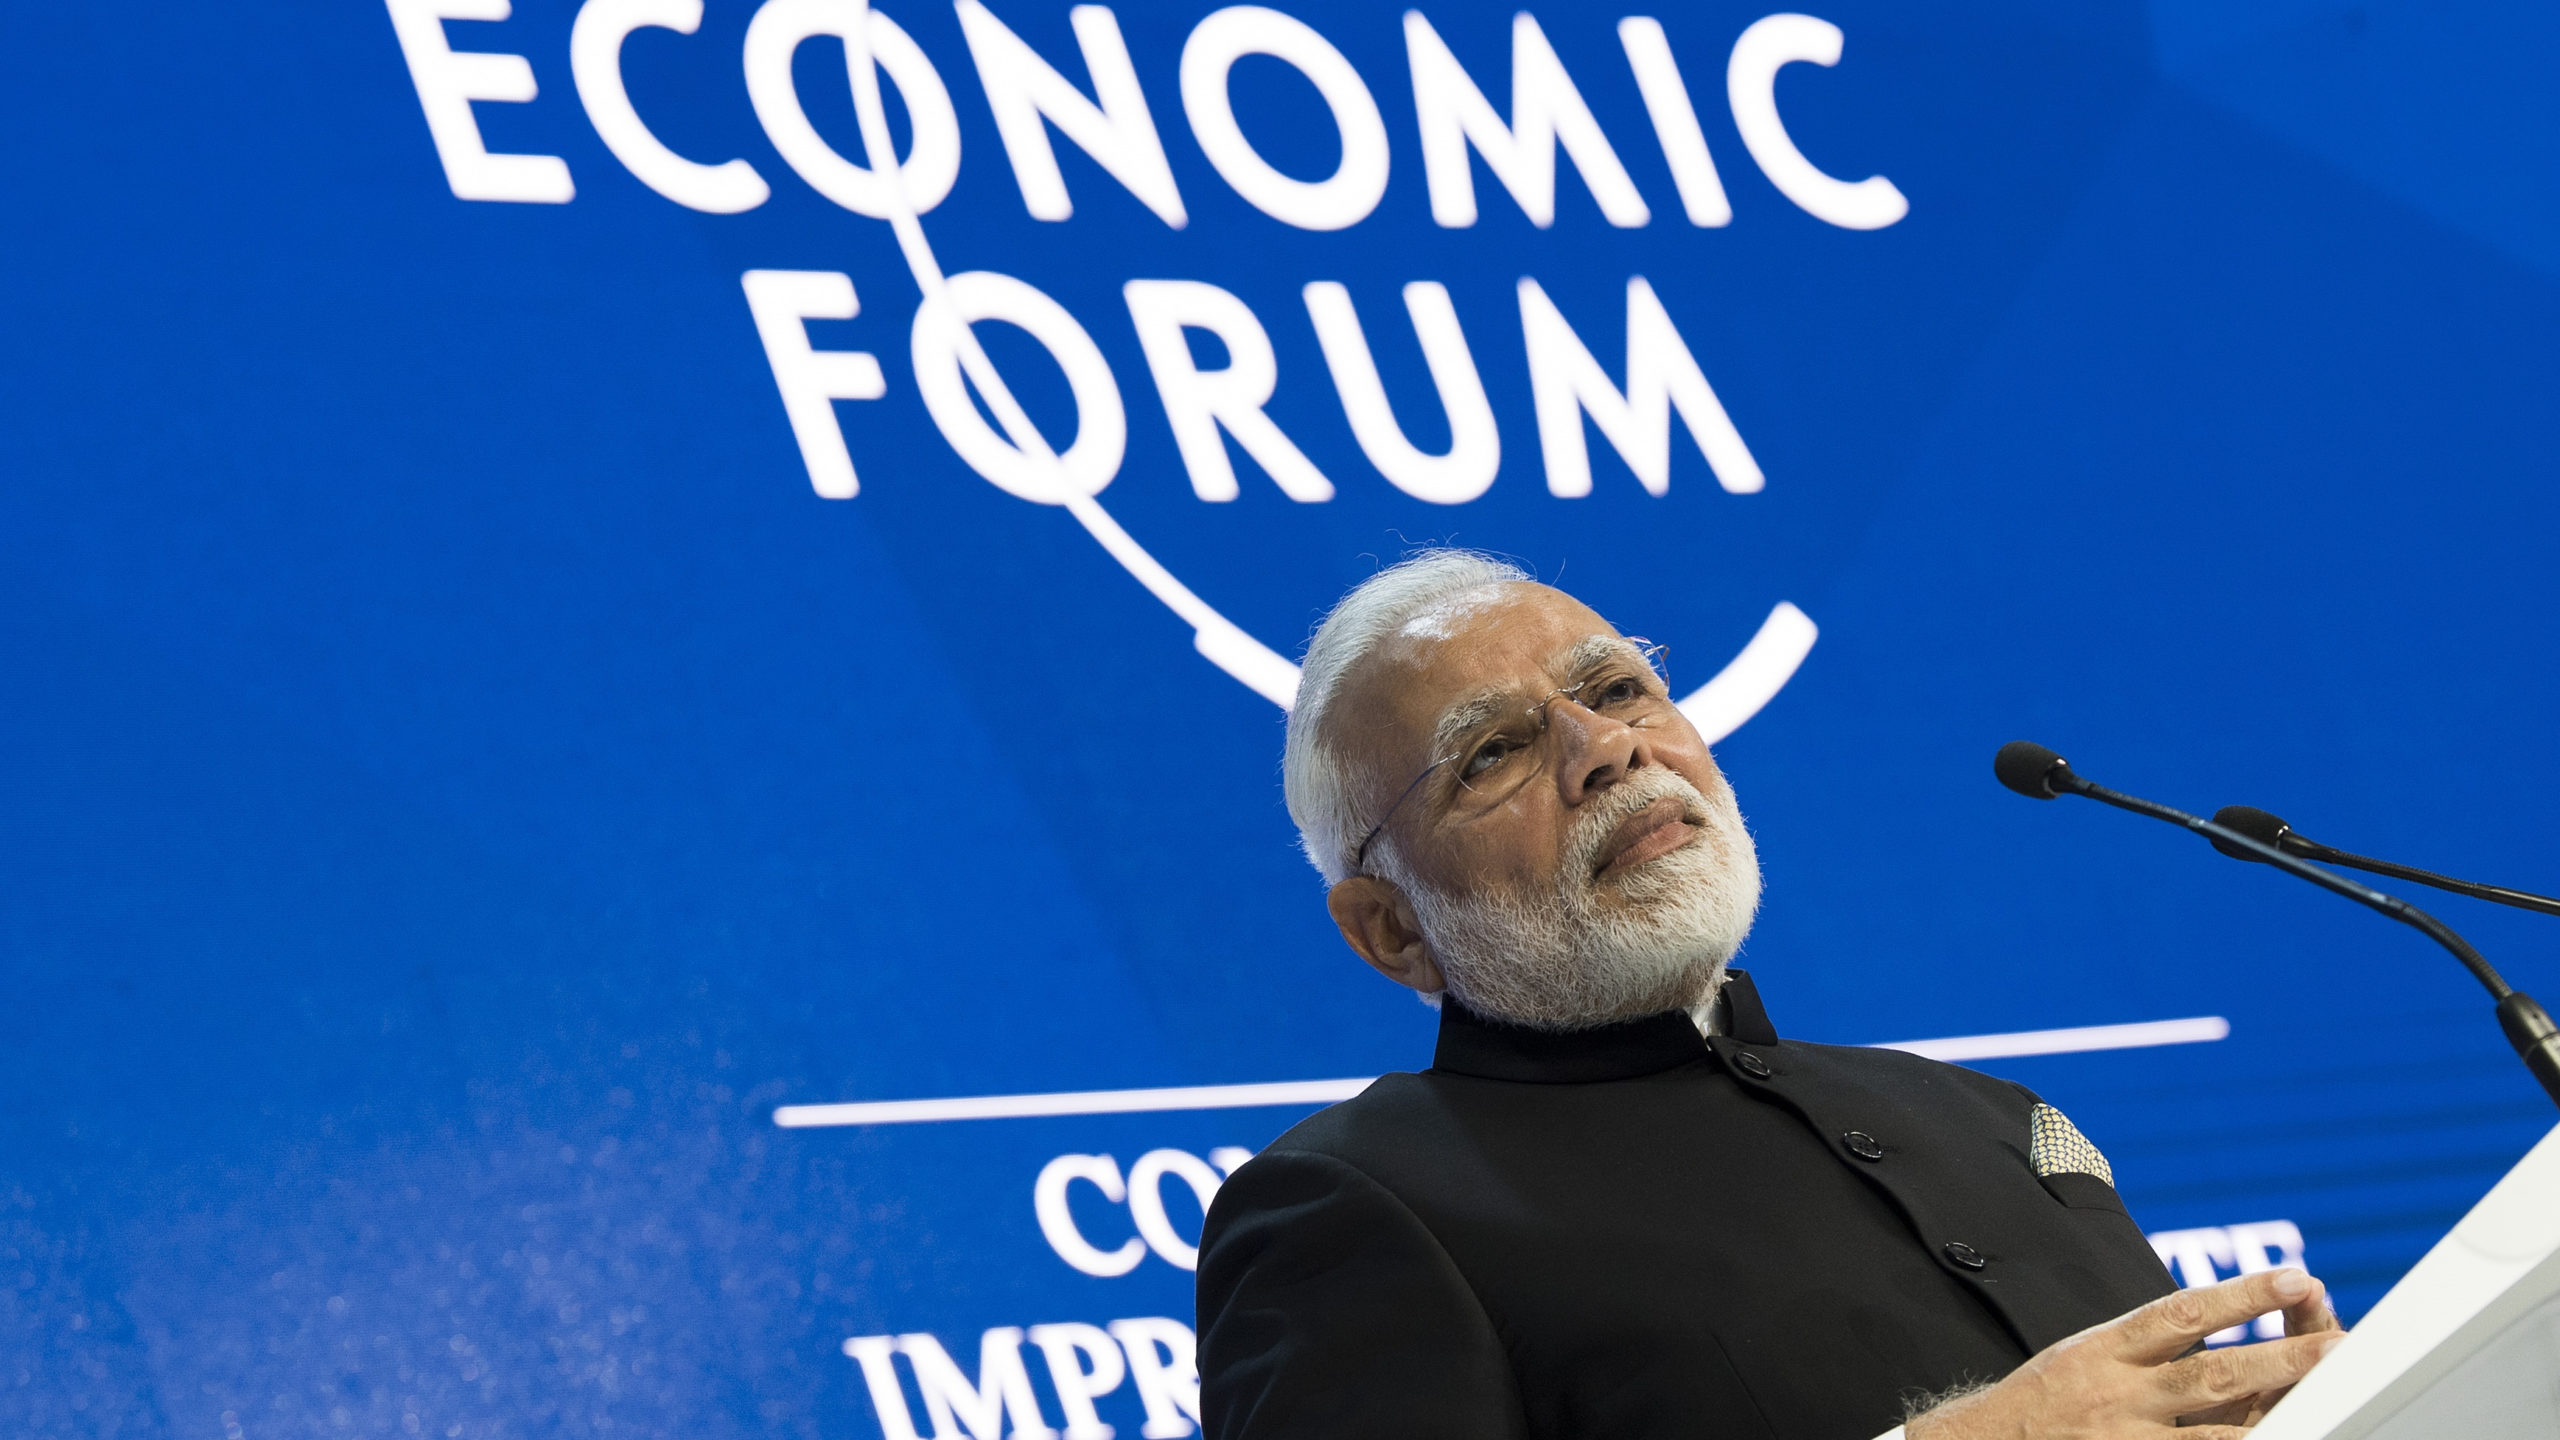 Narendra Modi, Prime Minister of India during the Opening Plenary at the Annual Meeting 2018 of the World Economic Forum in Davos, January 23, 2018. Copyright by World Economic Forum / Valeriano Di Domenico